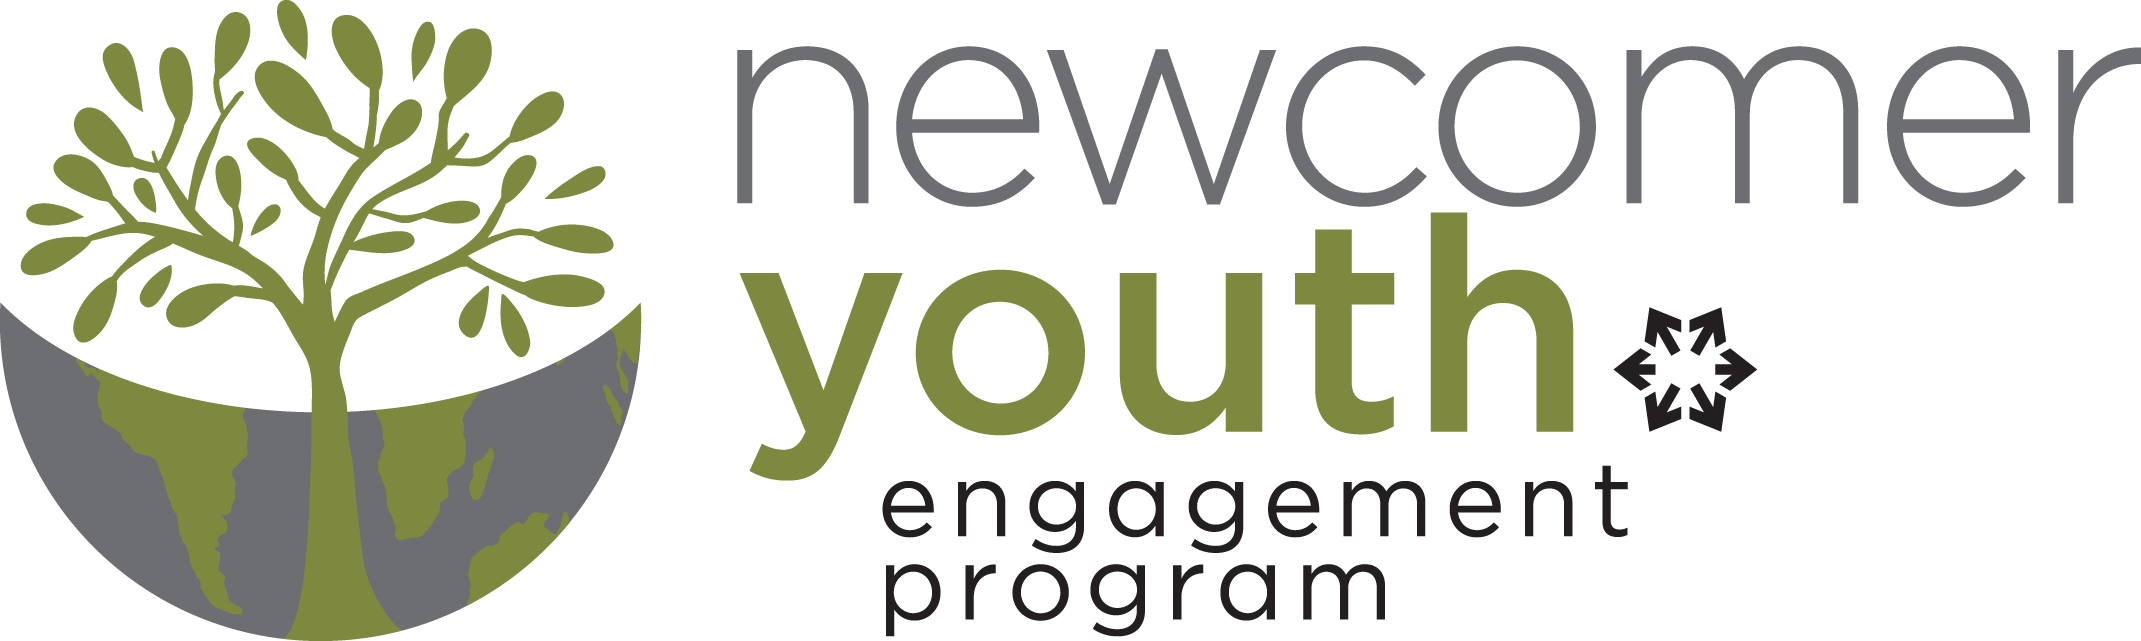 Newcomer Youth Engagement Program